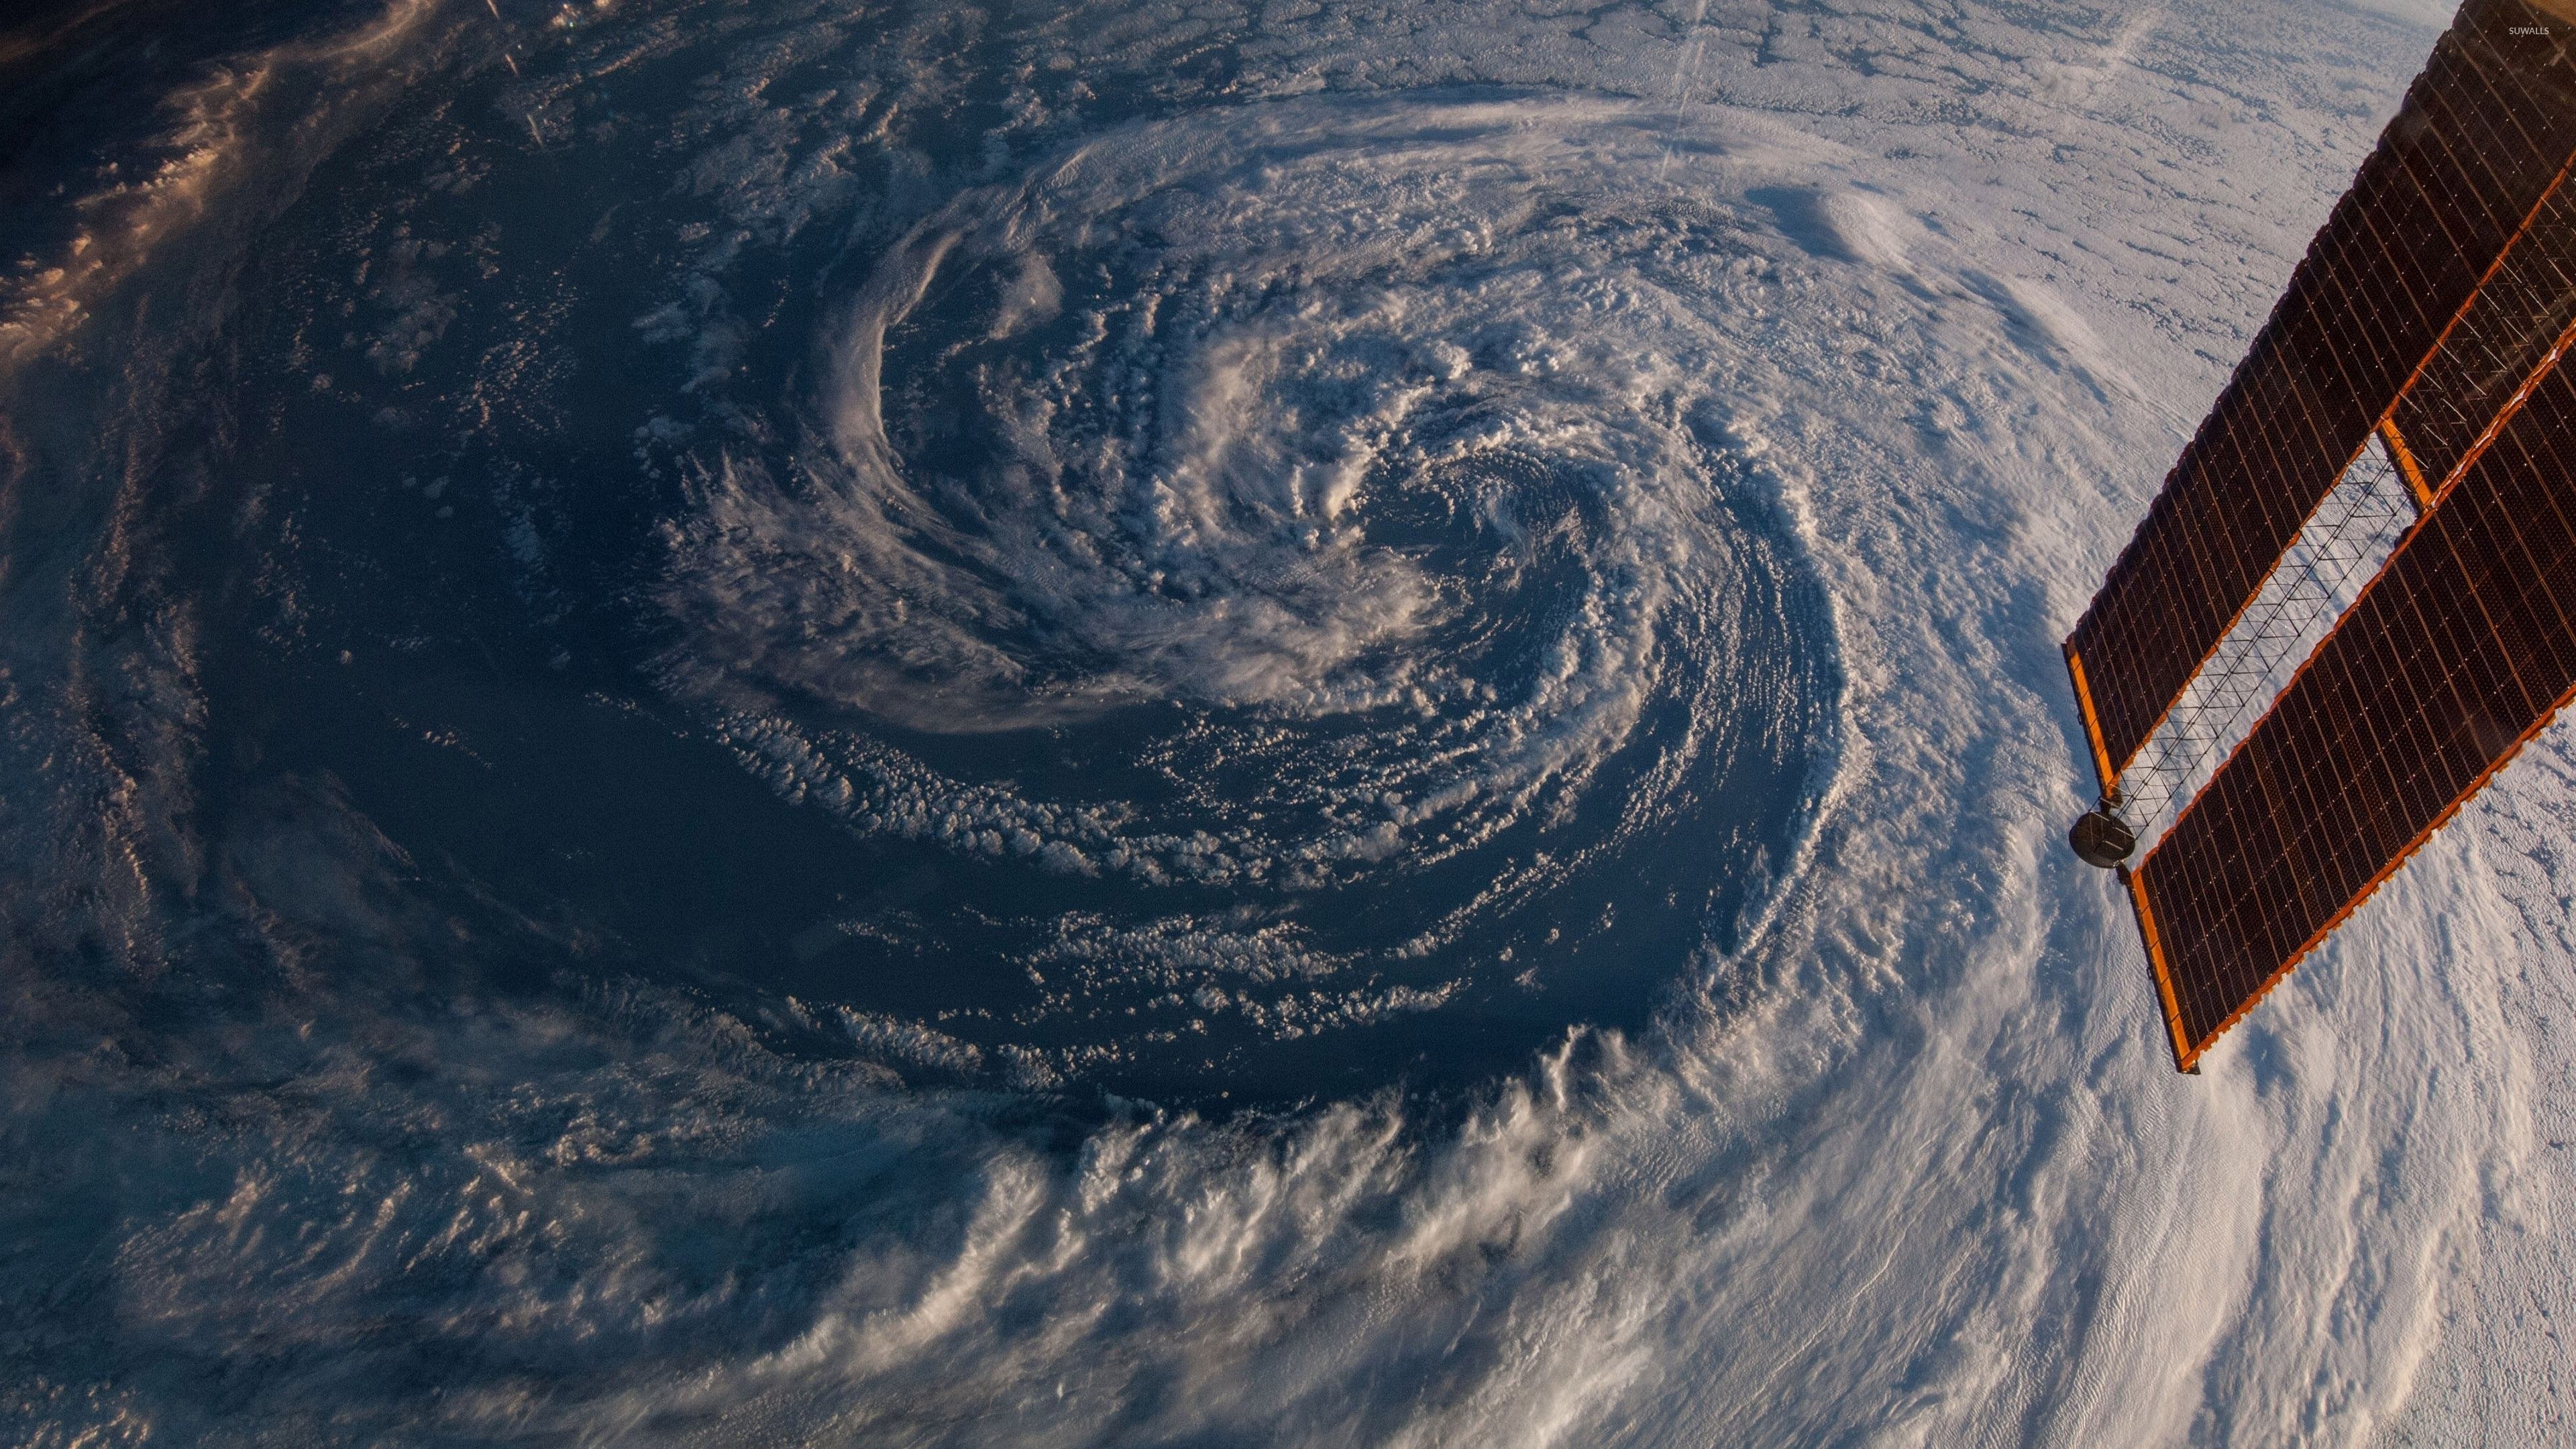 Hurricane 4K wallpaper for your desktop or mobile screen free and easy to download